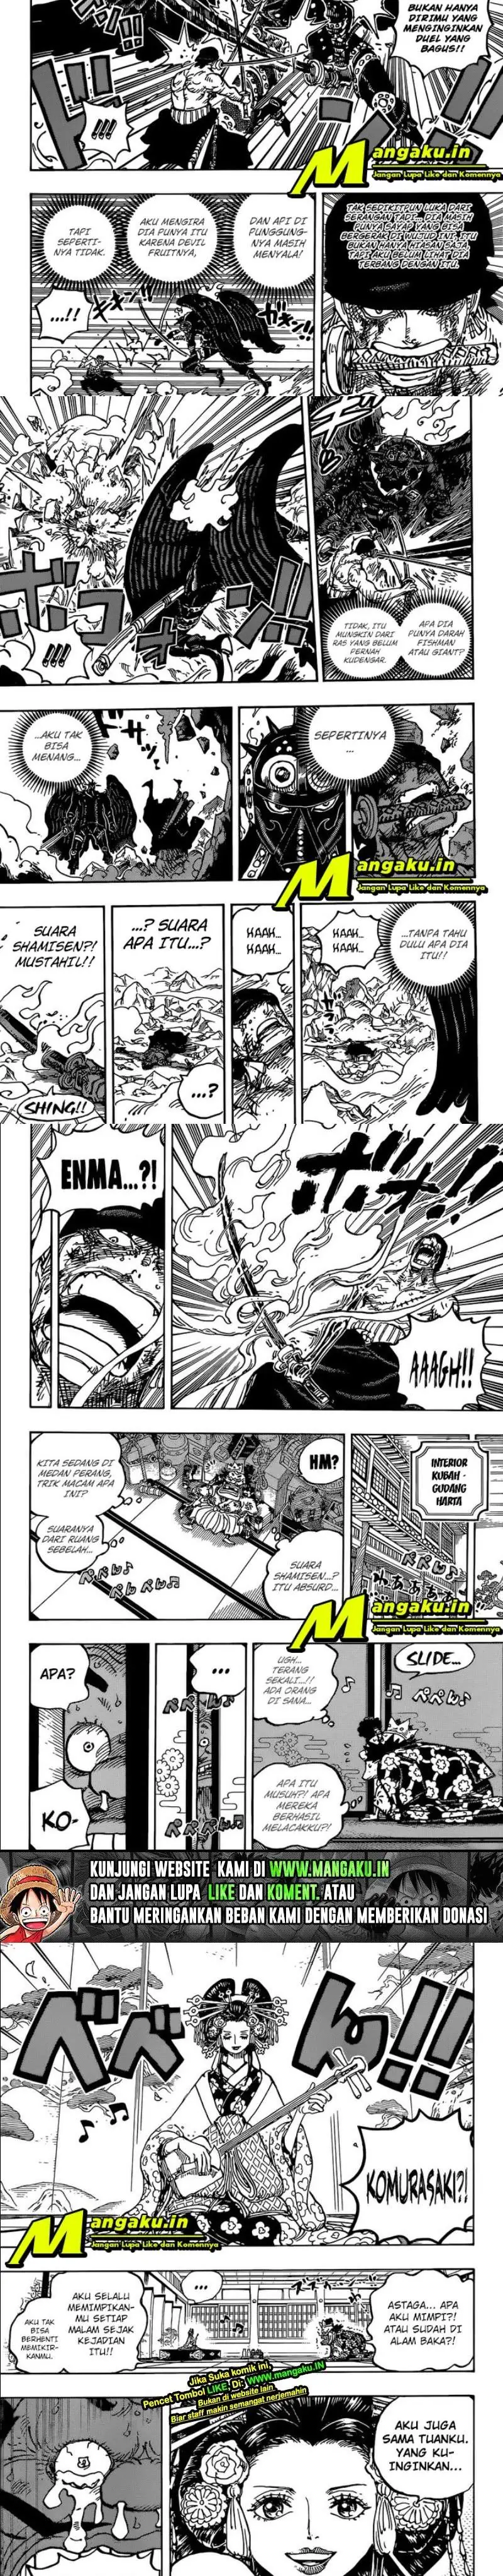 One Piece Chapter 1032 Hd - 45